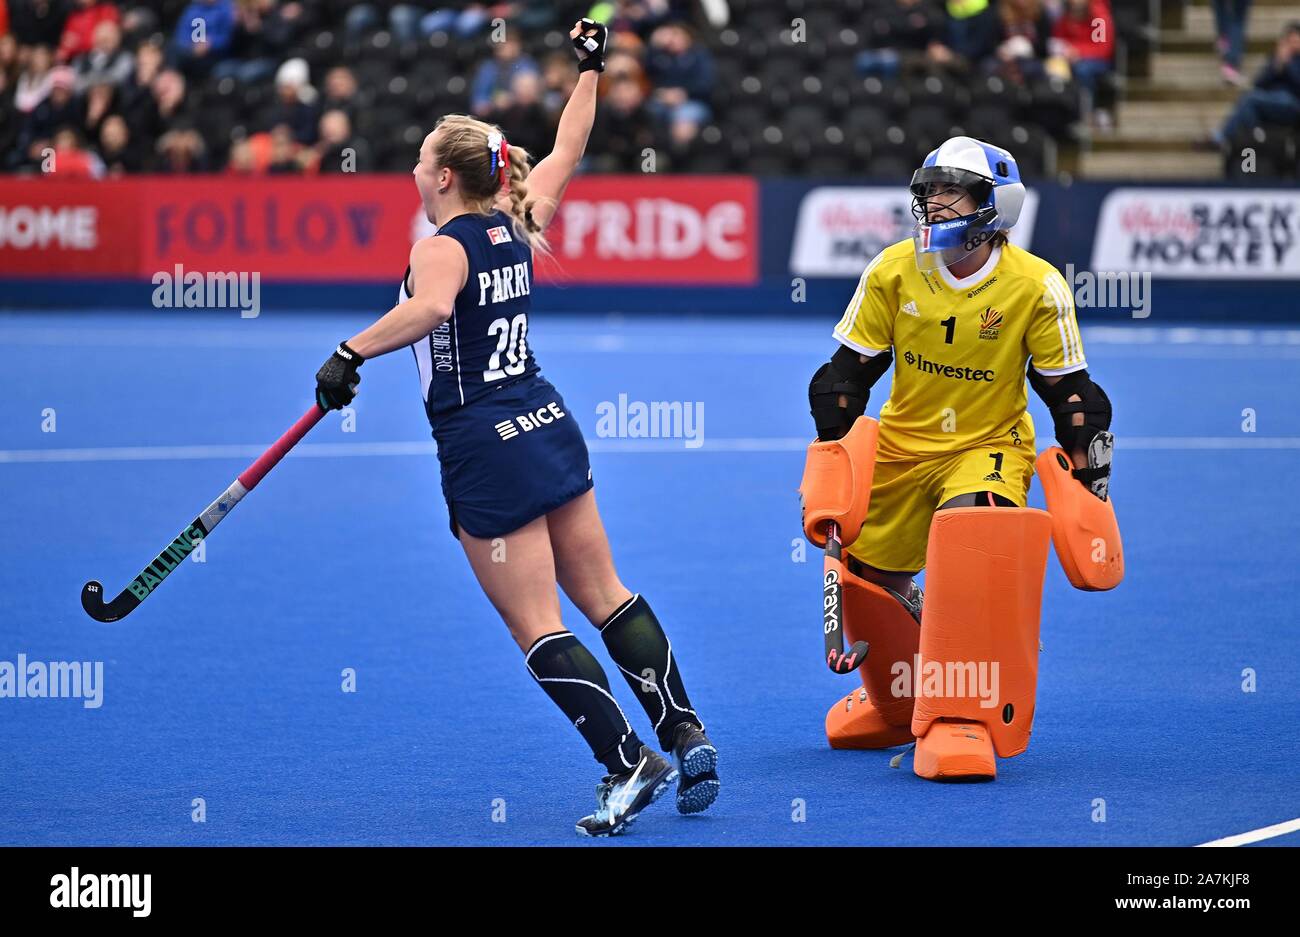 Stratford, London, UK. 3rd November 2019. Francisca Parra (Chile) celebrates scoring as Maddie Hinch (Great Britain, goalkeeper) looks disappointed, but the goal was disallowed. Great Britain v Chile. FIH Womens Olympic hockey qualifier. Lee Valley hockey and tennis centre. Stratford. London. United Kingdom. Credit Garry Bowden/Sport in PicturesAlamy Live News. Stock Photo